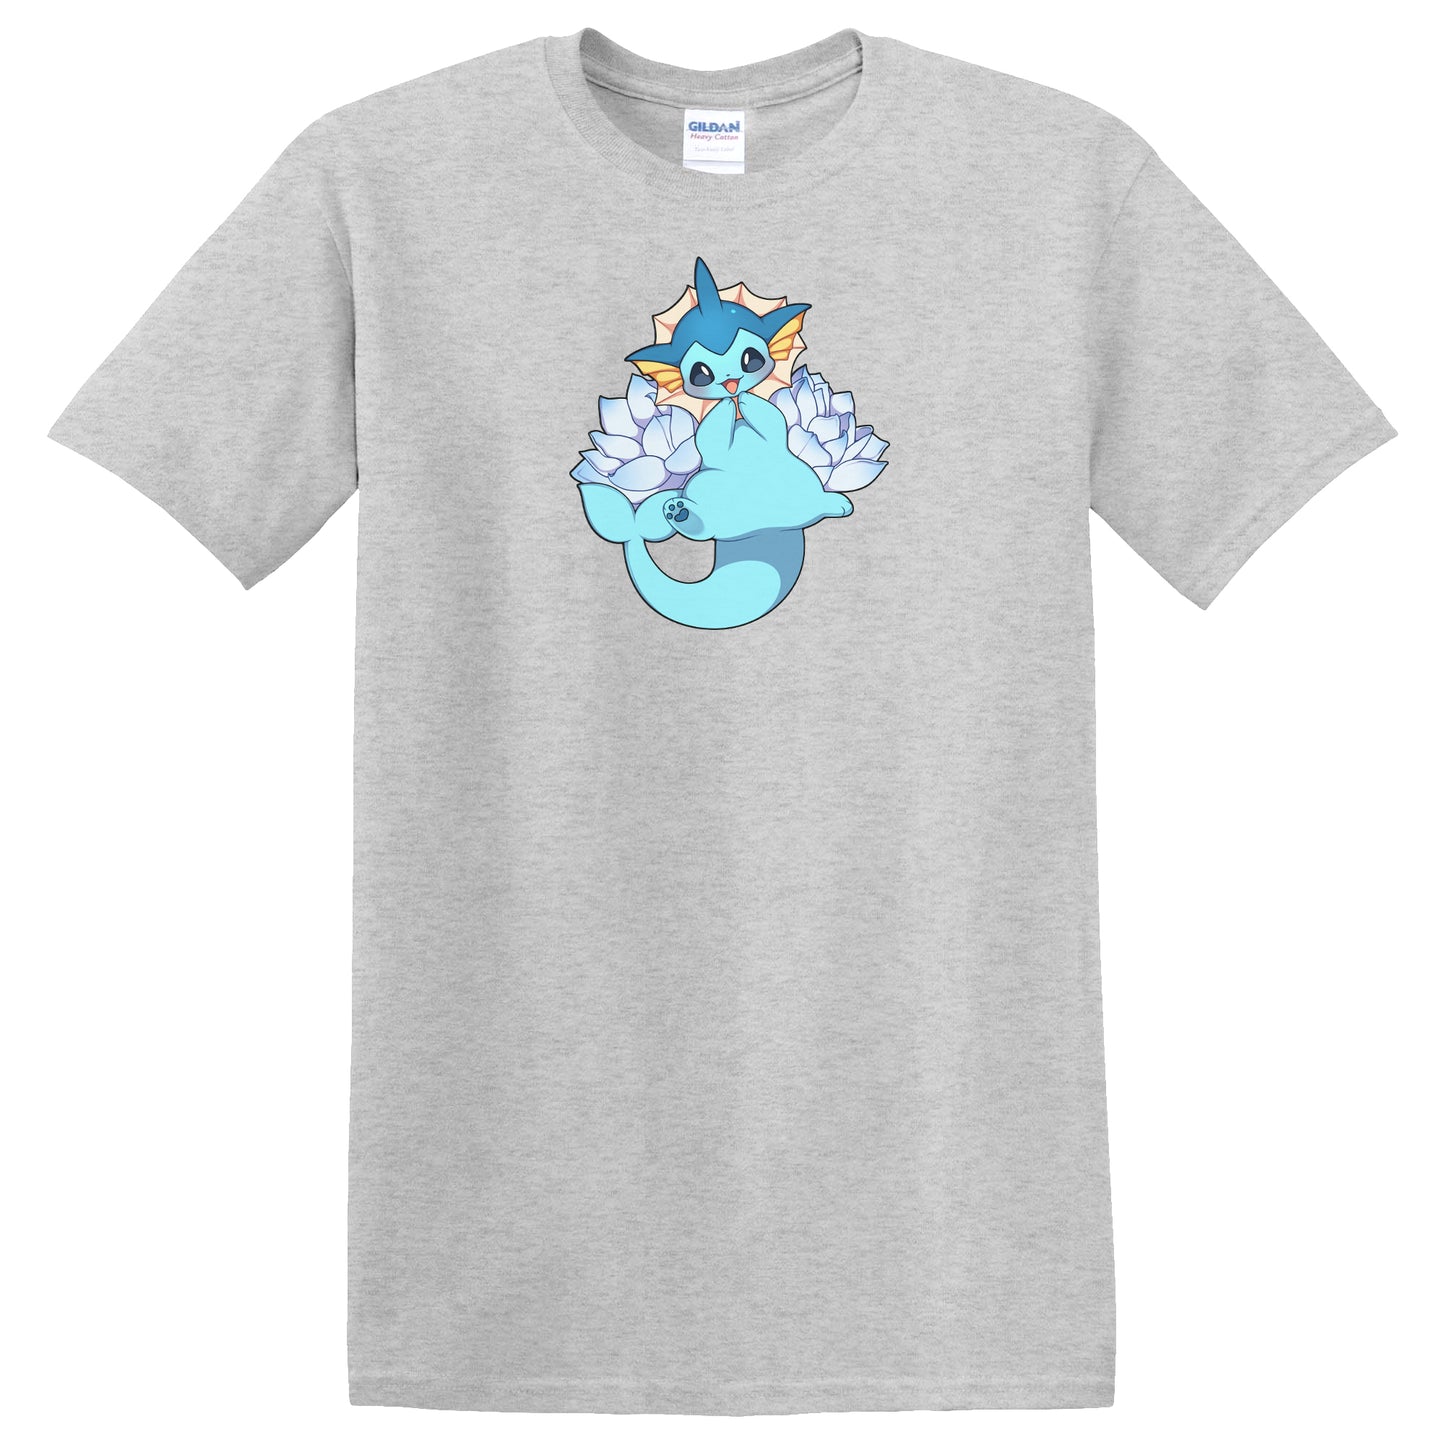 Vaporeon with Flowers T-Shirt